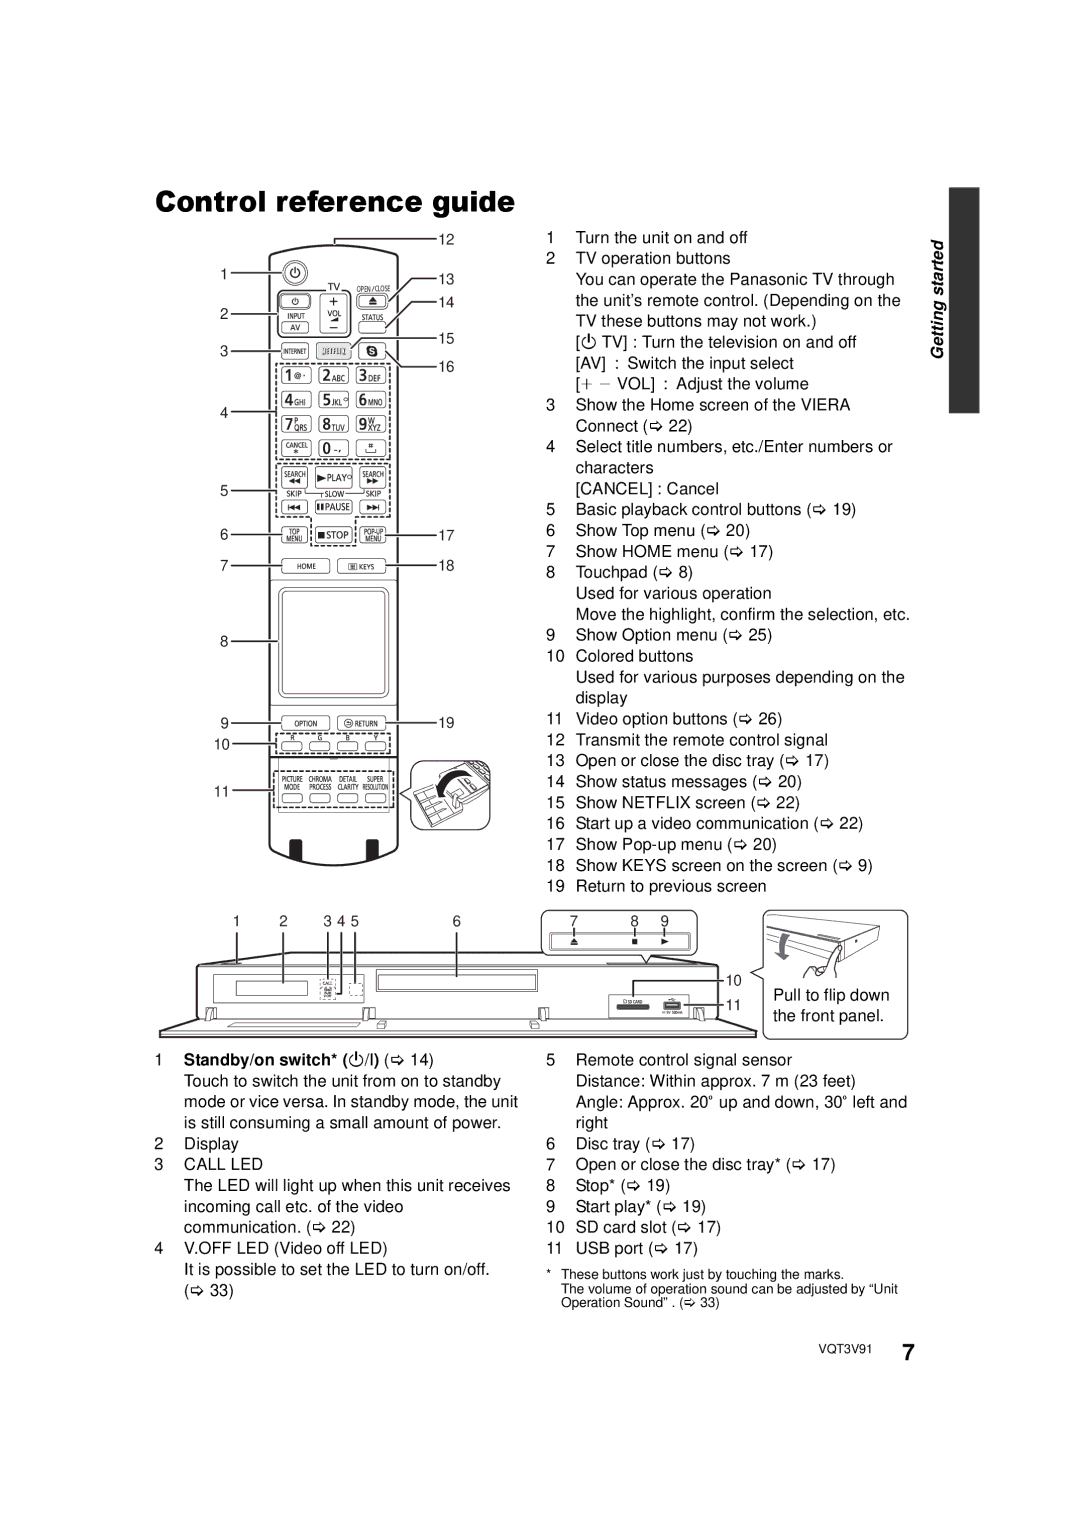 Panasonic DMP-BDT500 owner manual Control reference guide, Front panel, Standby/on switch* Í/I, Display, Pull to flip down 